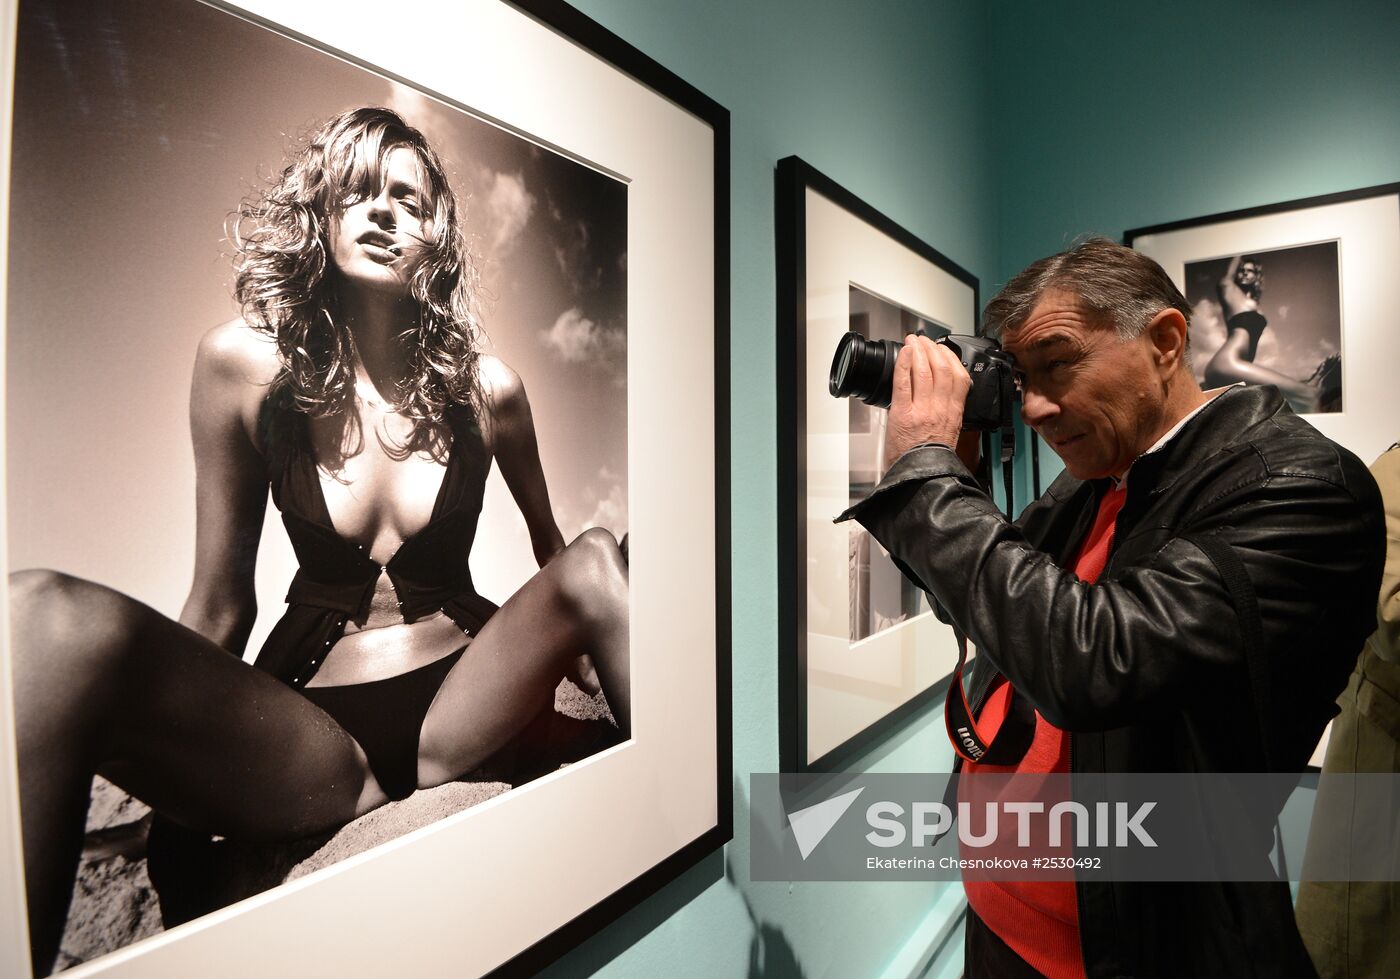 Opening of exhibition dedicated to Pirelli Calendar at Palazzo Reale